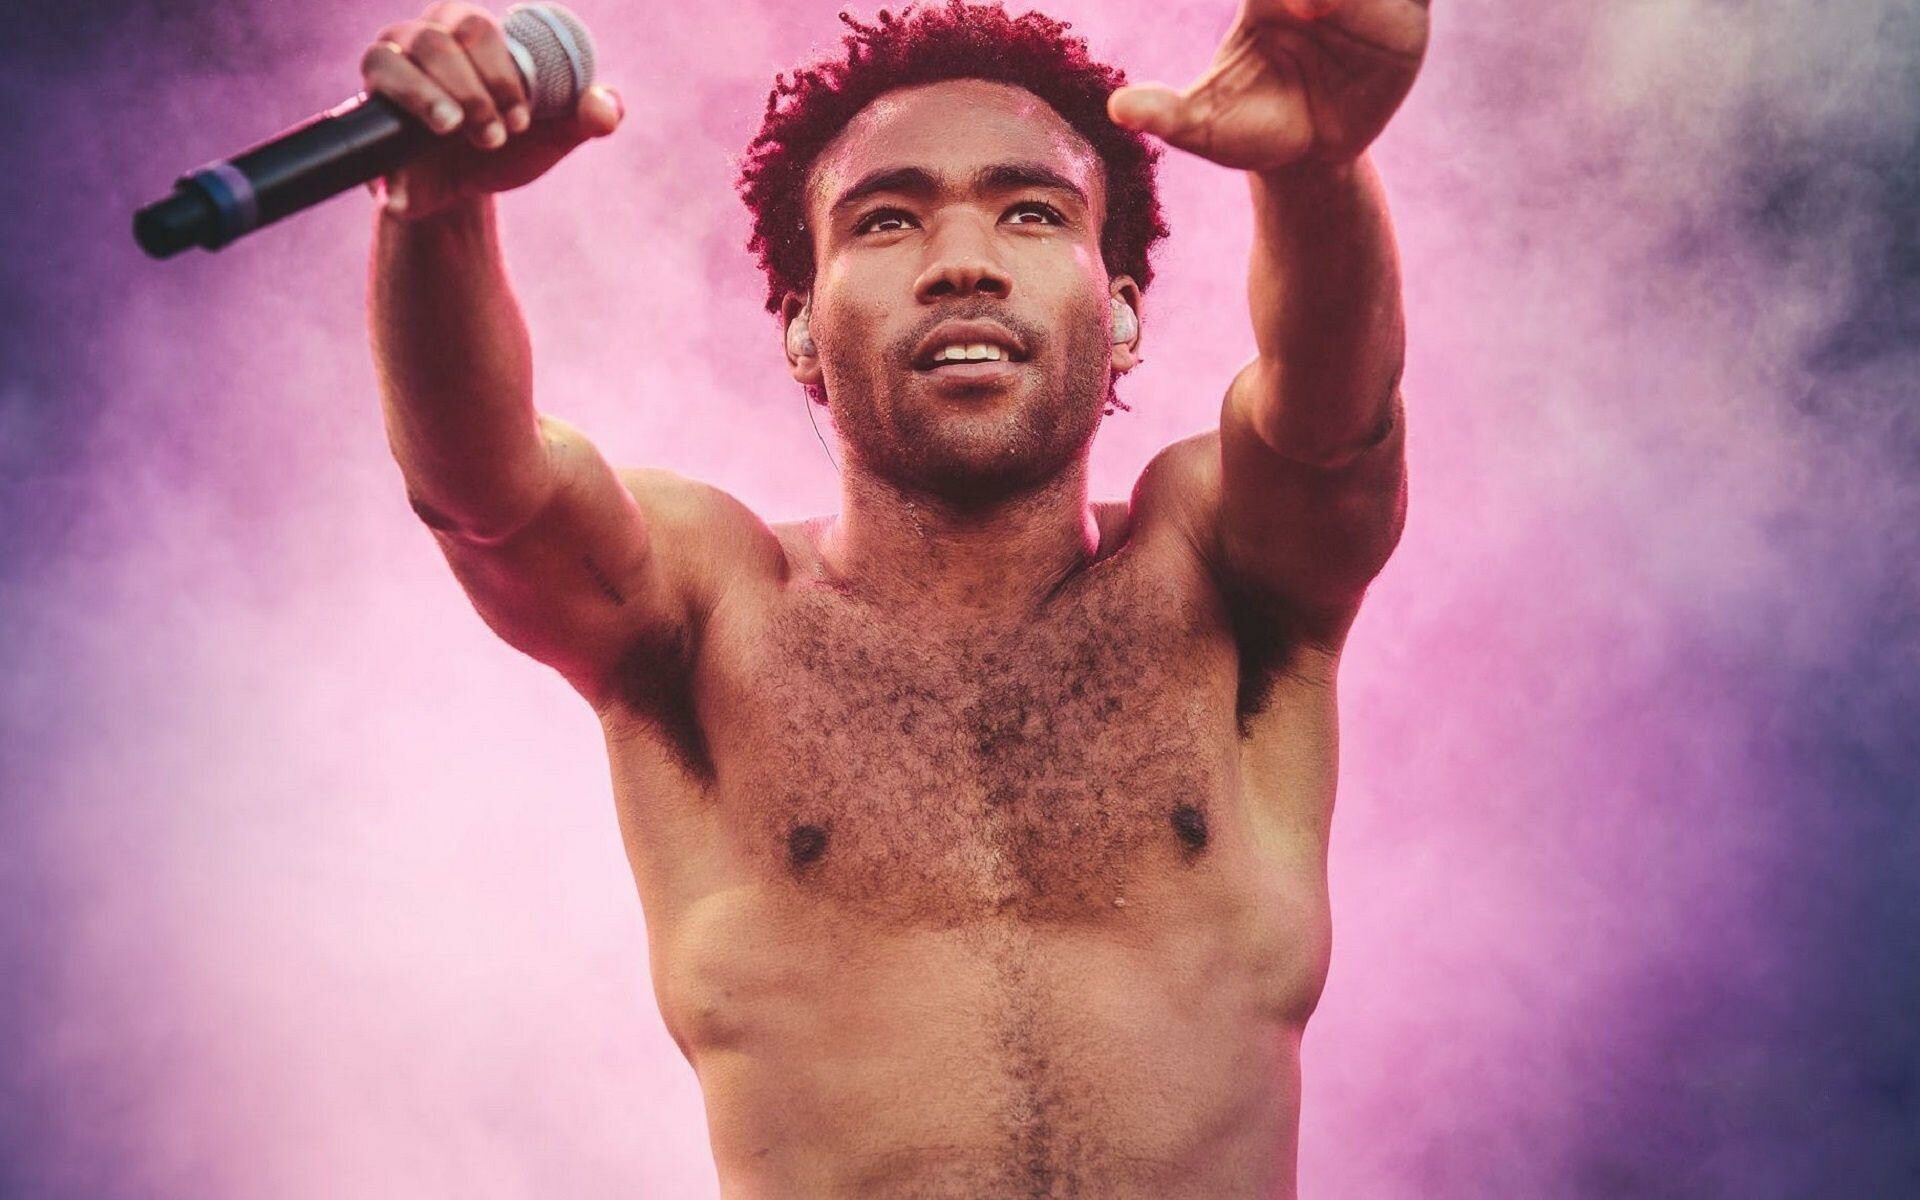 Donald Glover: "Sweatpants" was released on June 9, 2014 as the third official single from the album. 1920x1200 HD Wallpaper.